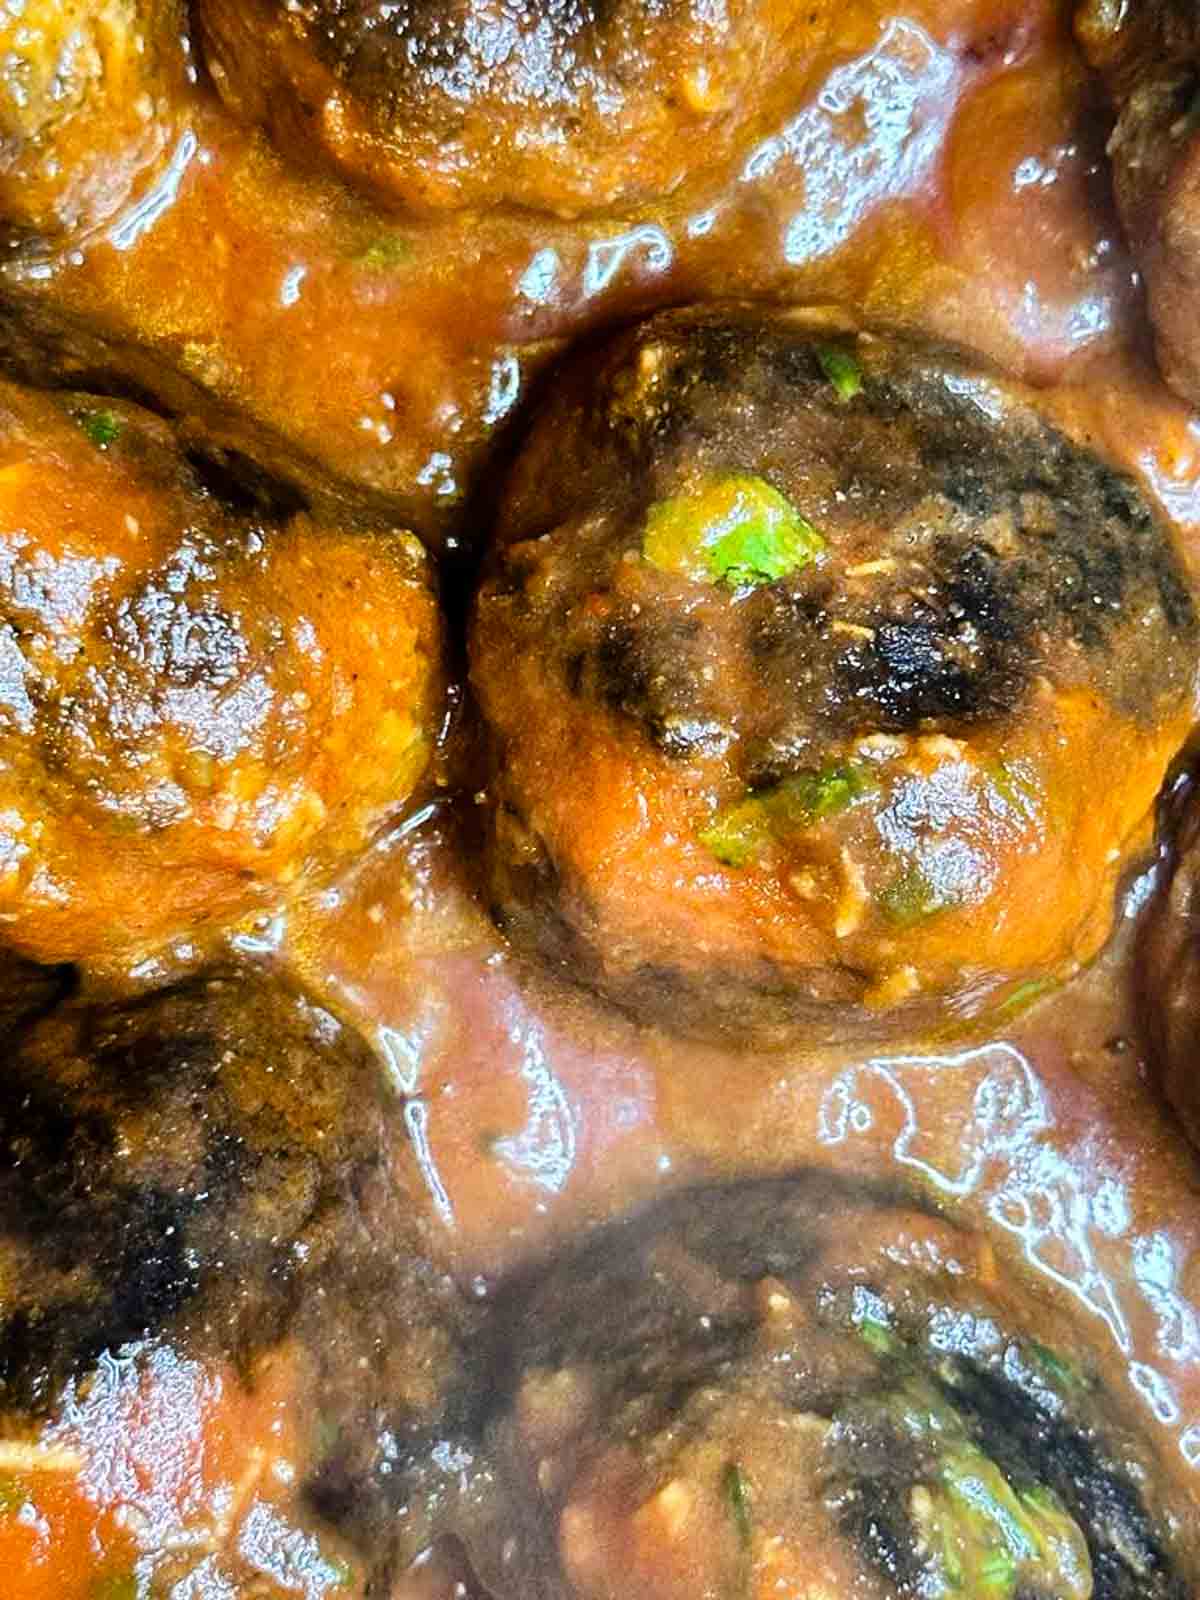 Finish cooking the meatballs in tomato sauce until they are cooked through.